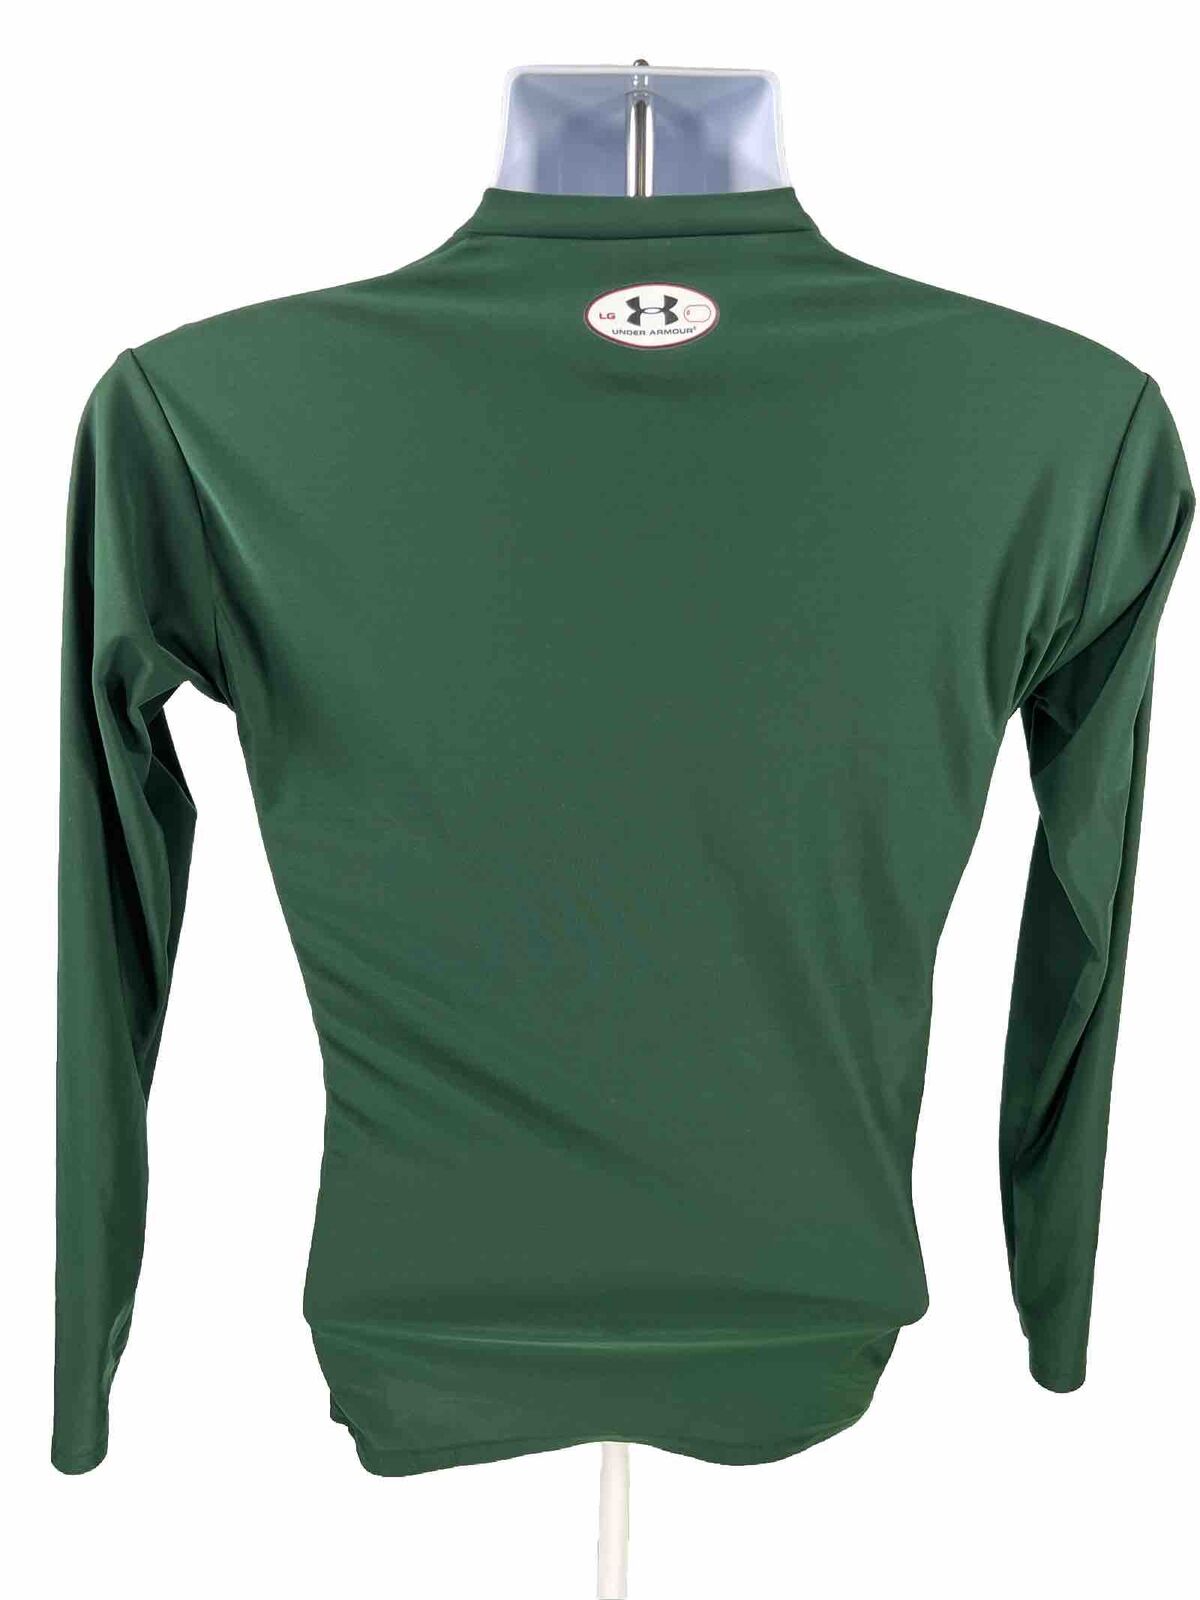 Under Armour Men's Green Long Sleeve Compression Fitted Shirt - L